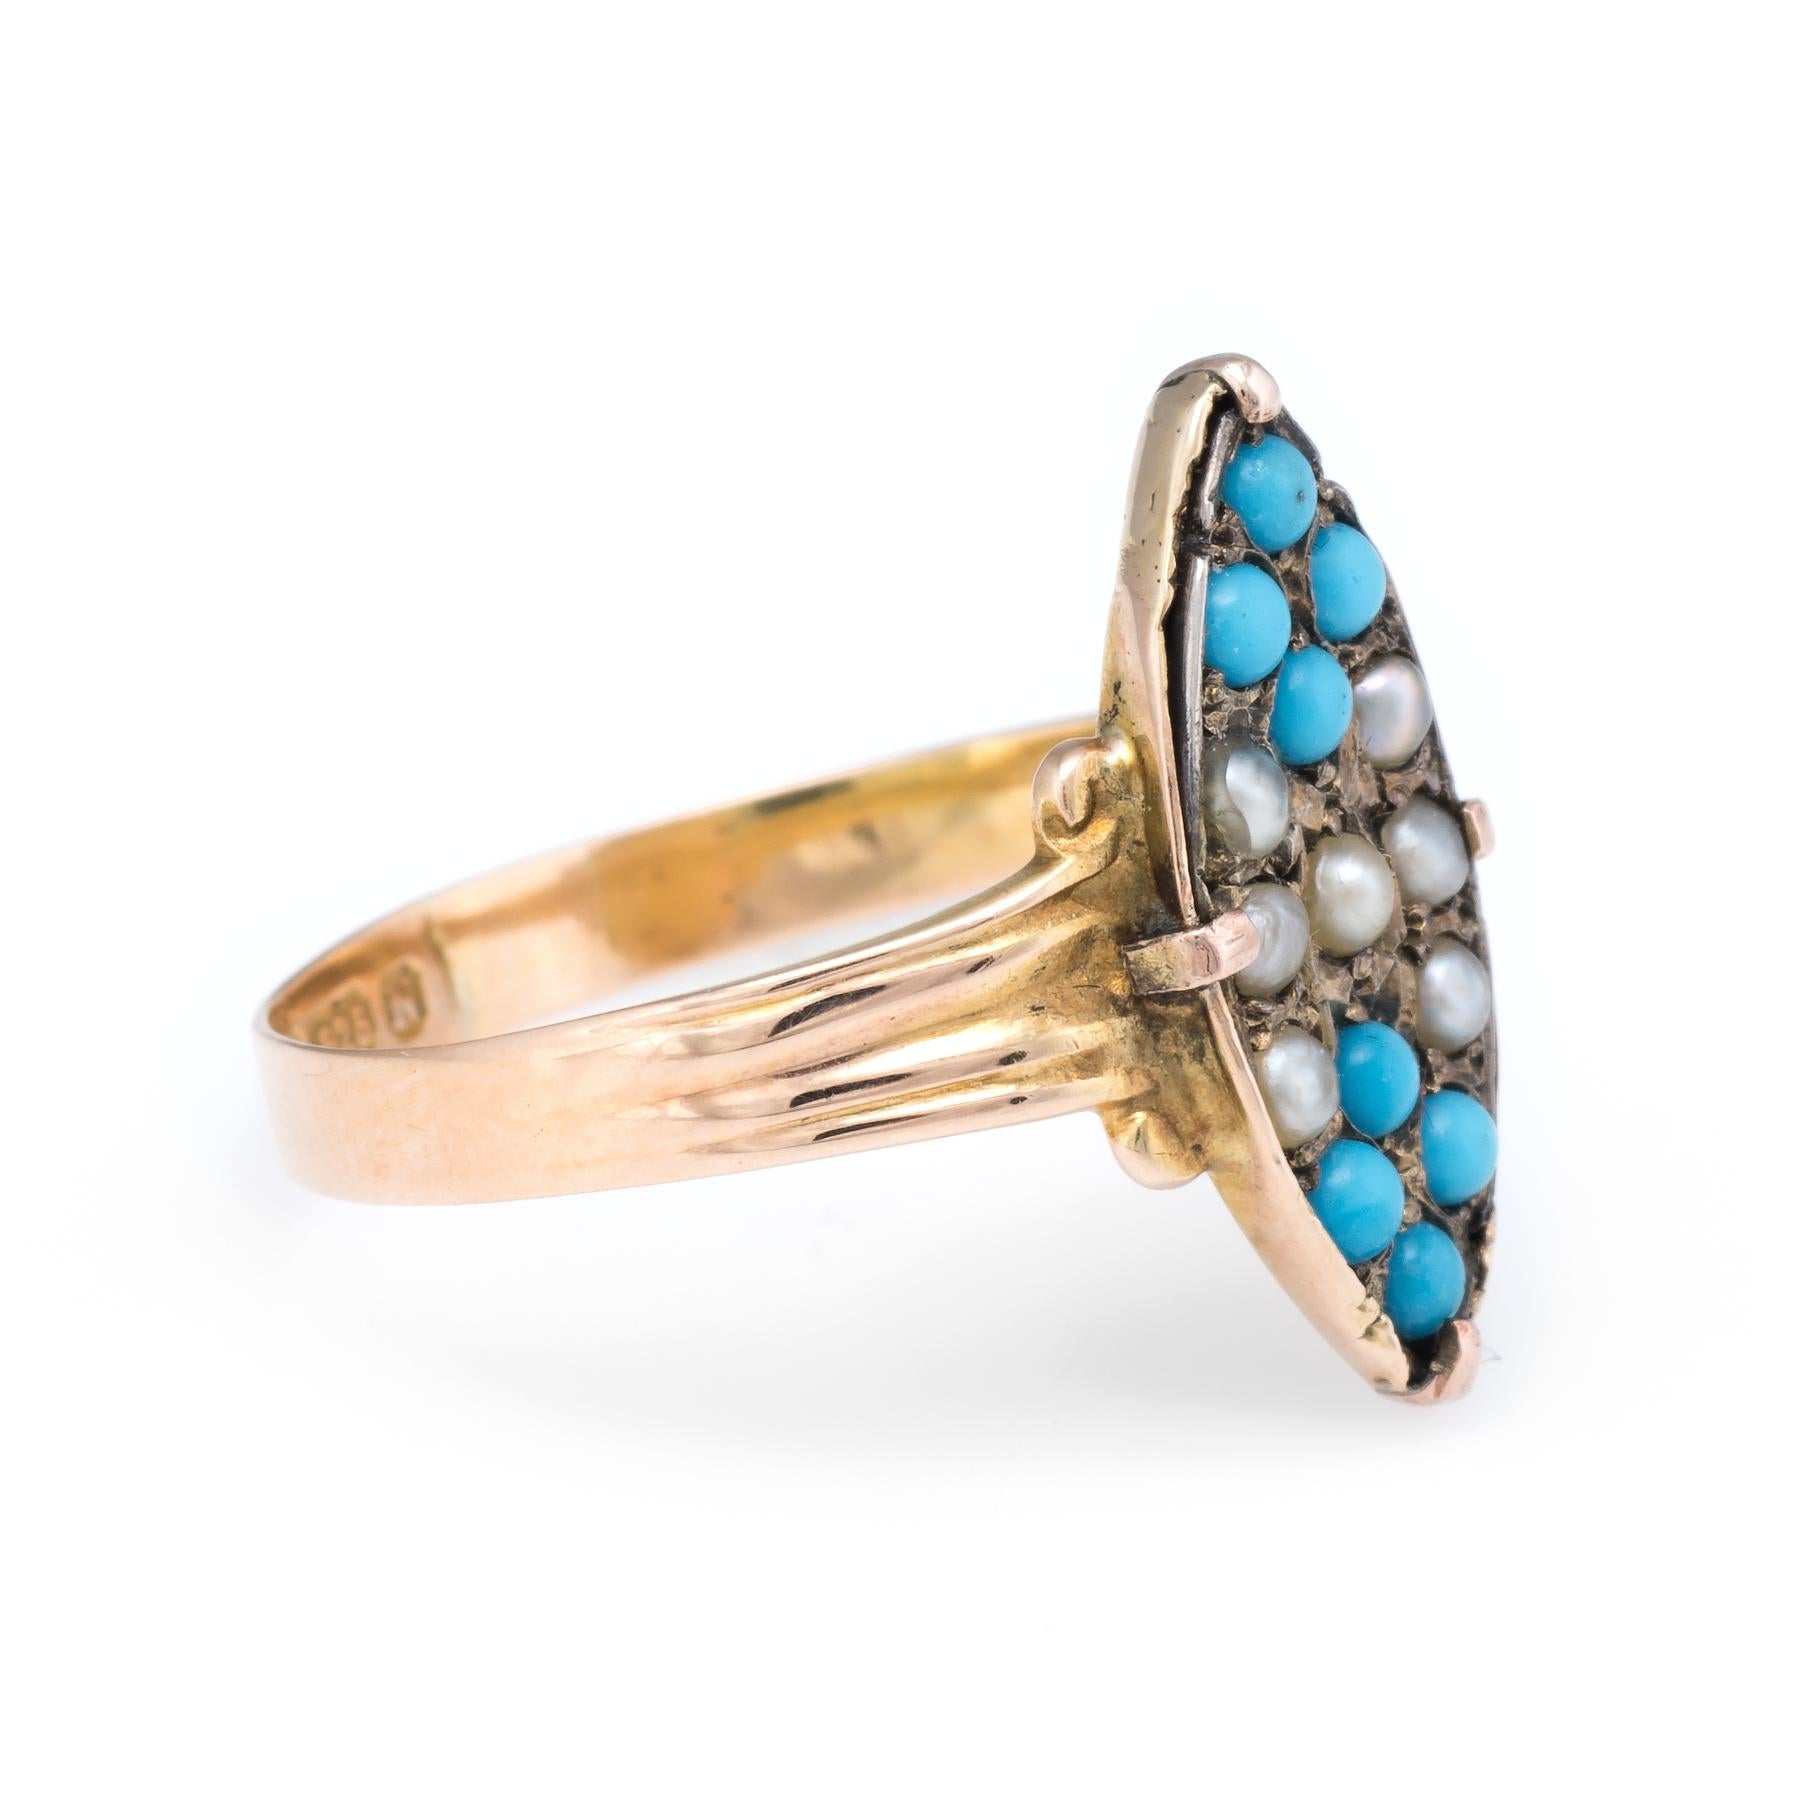 Finely detailed antique Victorian ring (circa 1896), crafted in 15 karat yellow gold. 

8 x 2mm seed pearls are accented with 7 x 2mm pieces of turquoise. The pearls and turquoise and in-tact and in good condition (some light surface abrasions